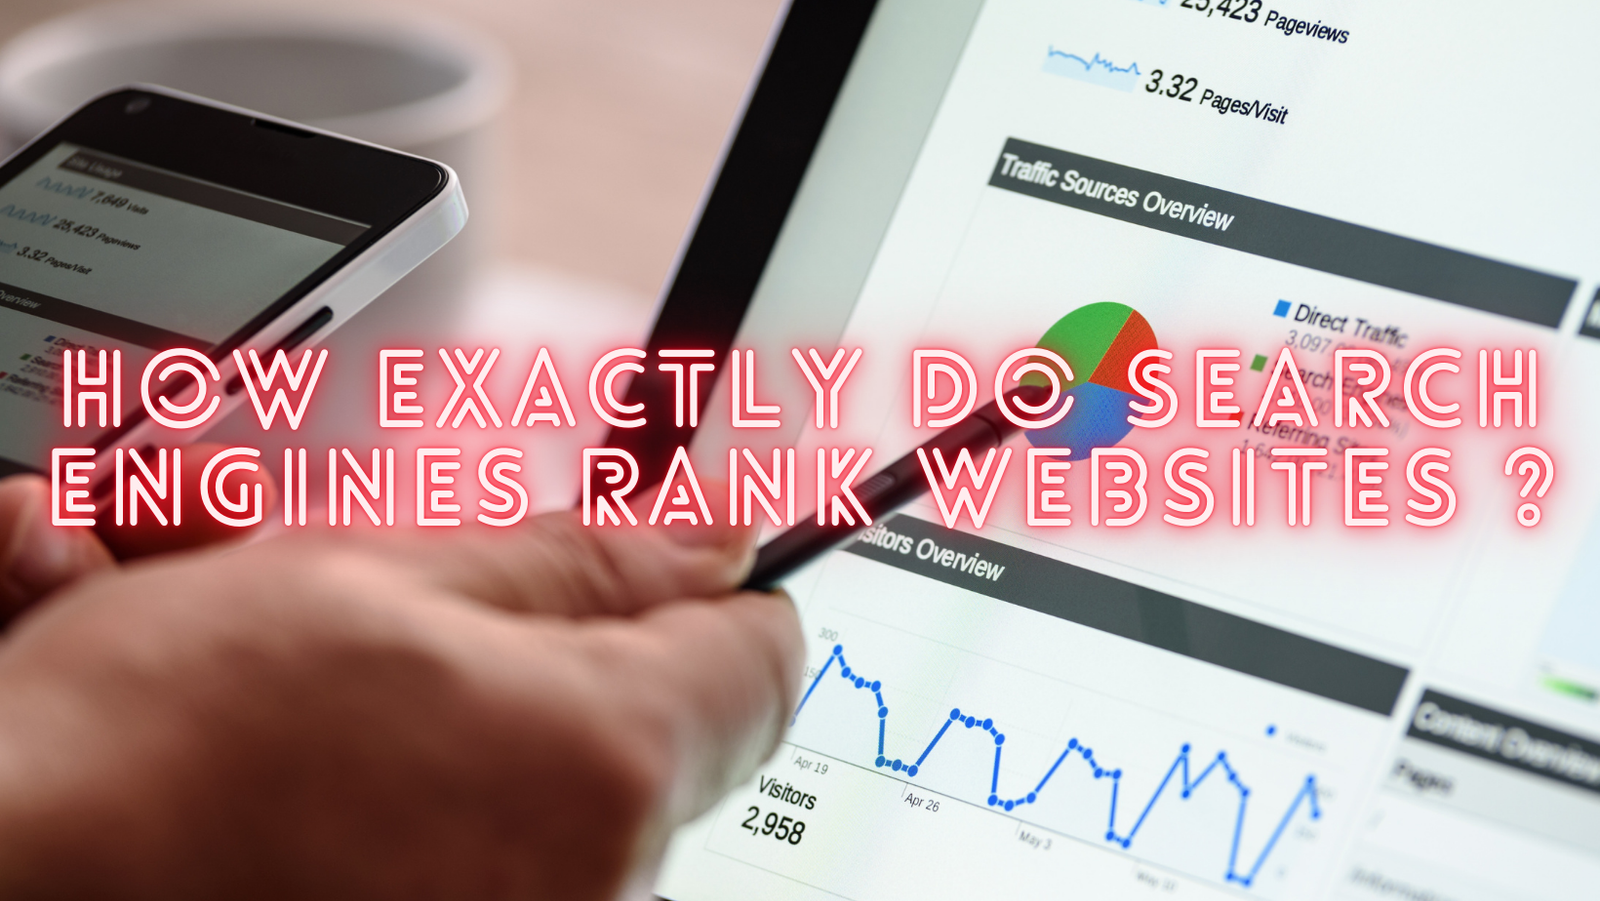 How Exactly Do Search Engines Rank Websites In Their Search Results